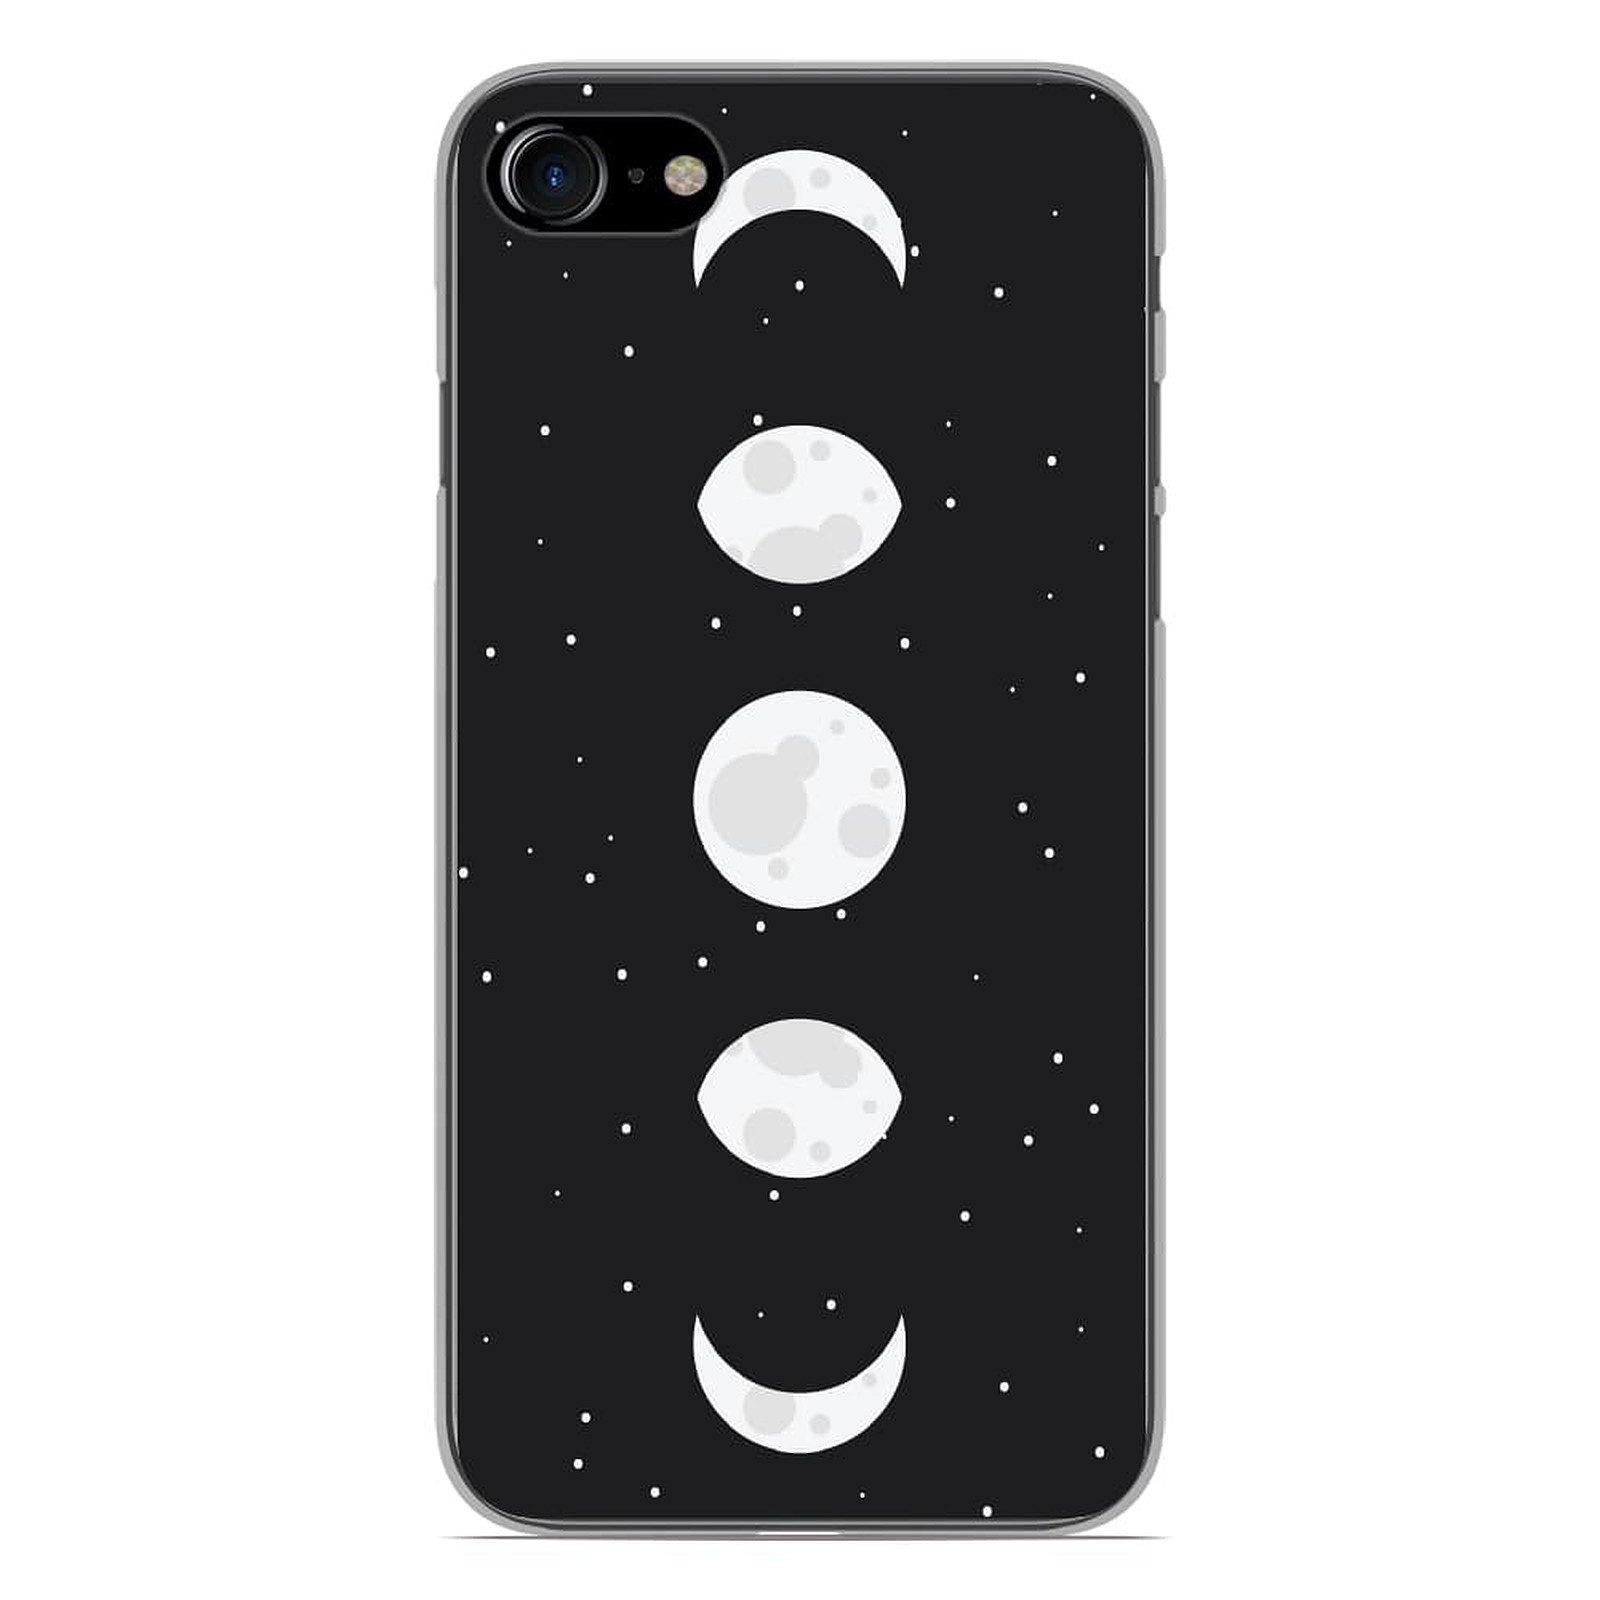 1001 Coques Coque silicone gel Apple iPhone 8 motif Phase de Lune - Coque telephone 1001Coques